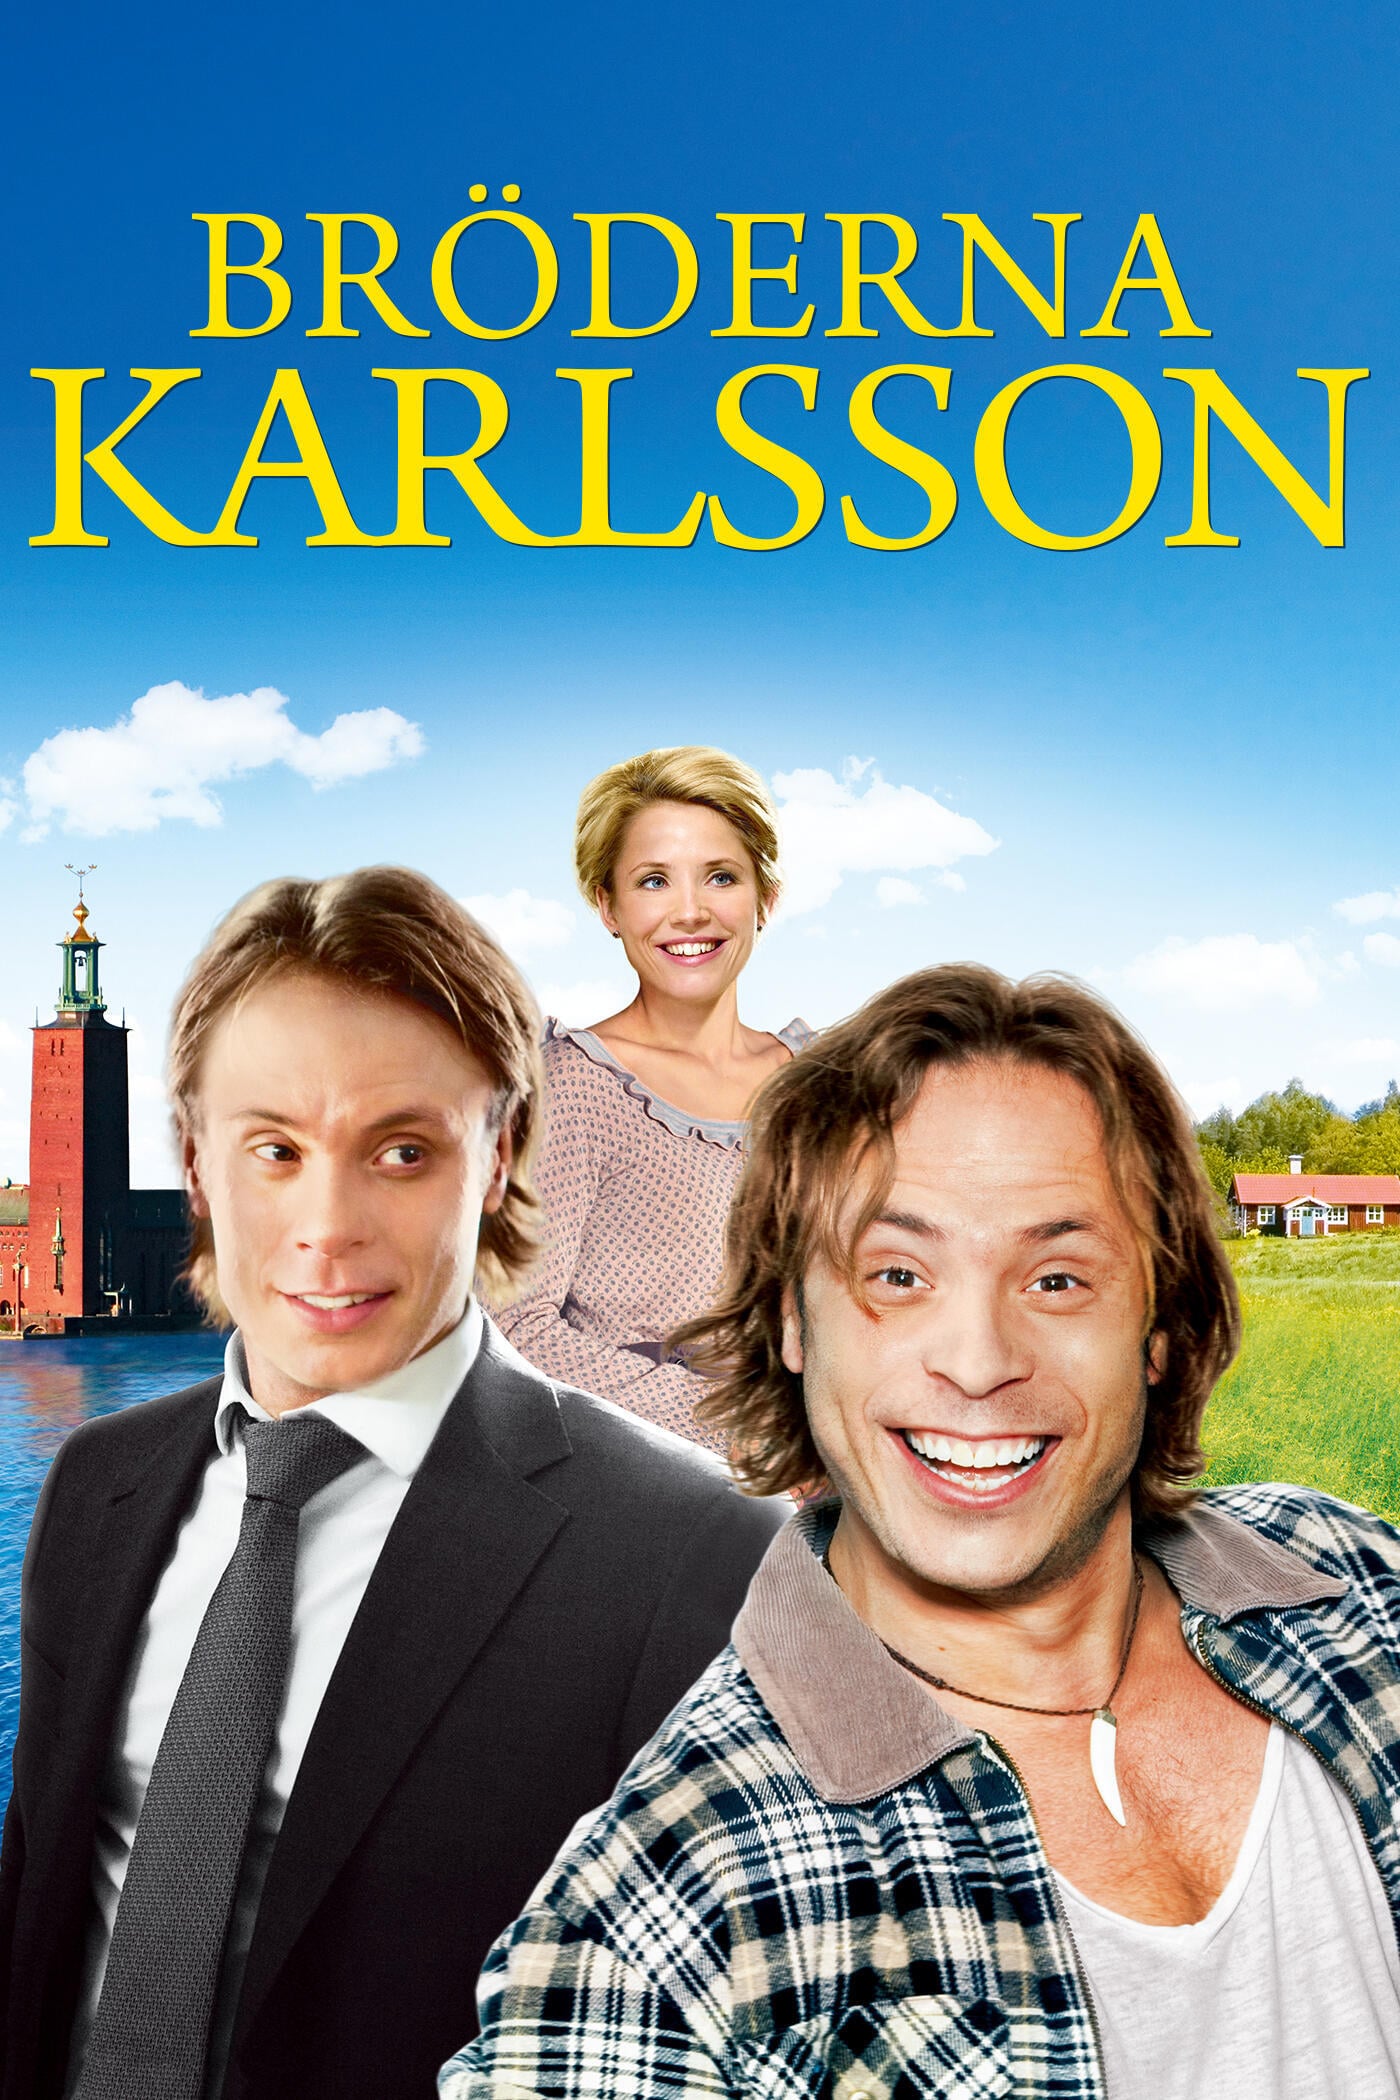 The Karlsson Brothers (2010)